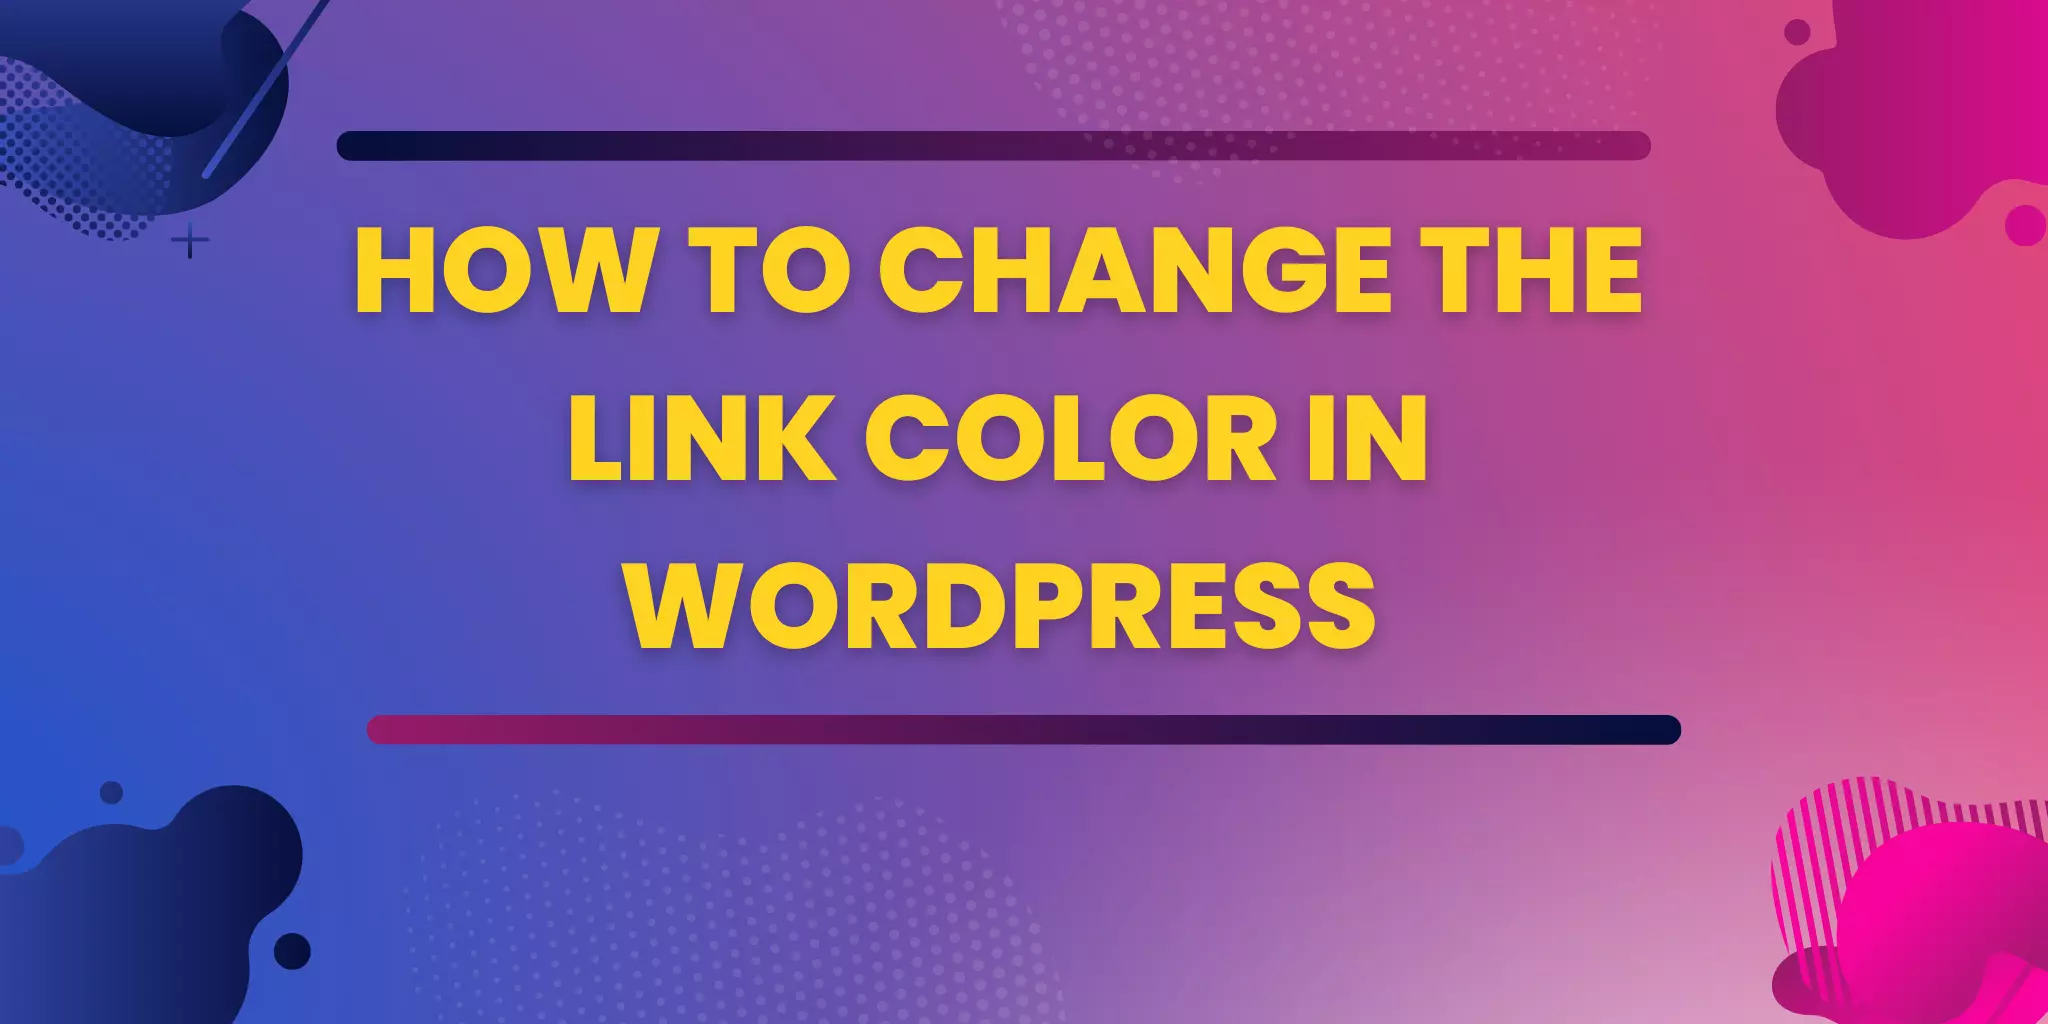 How to Change the Link Color in WordPress